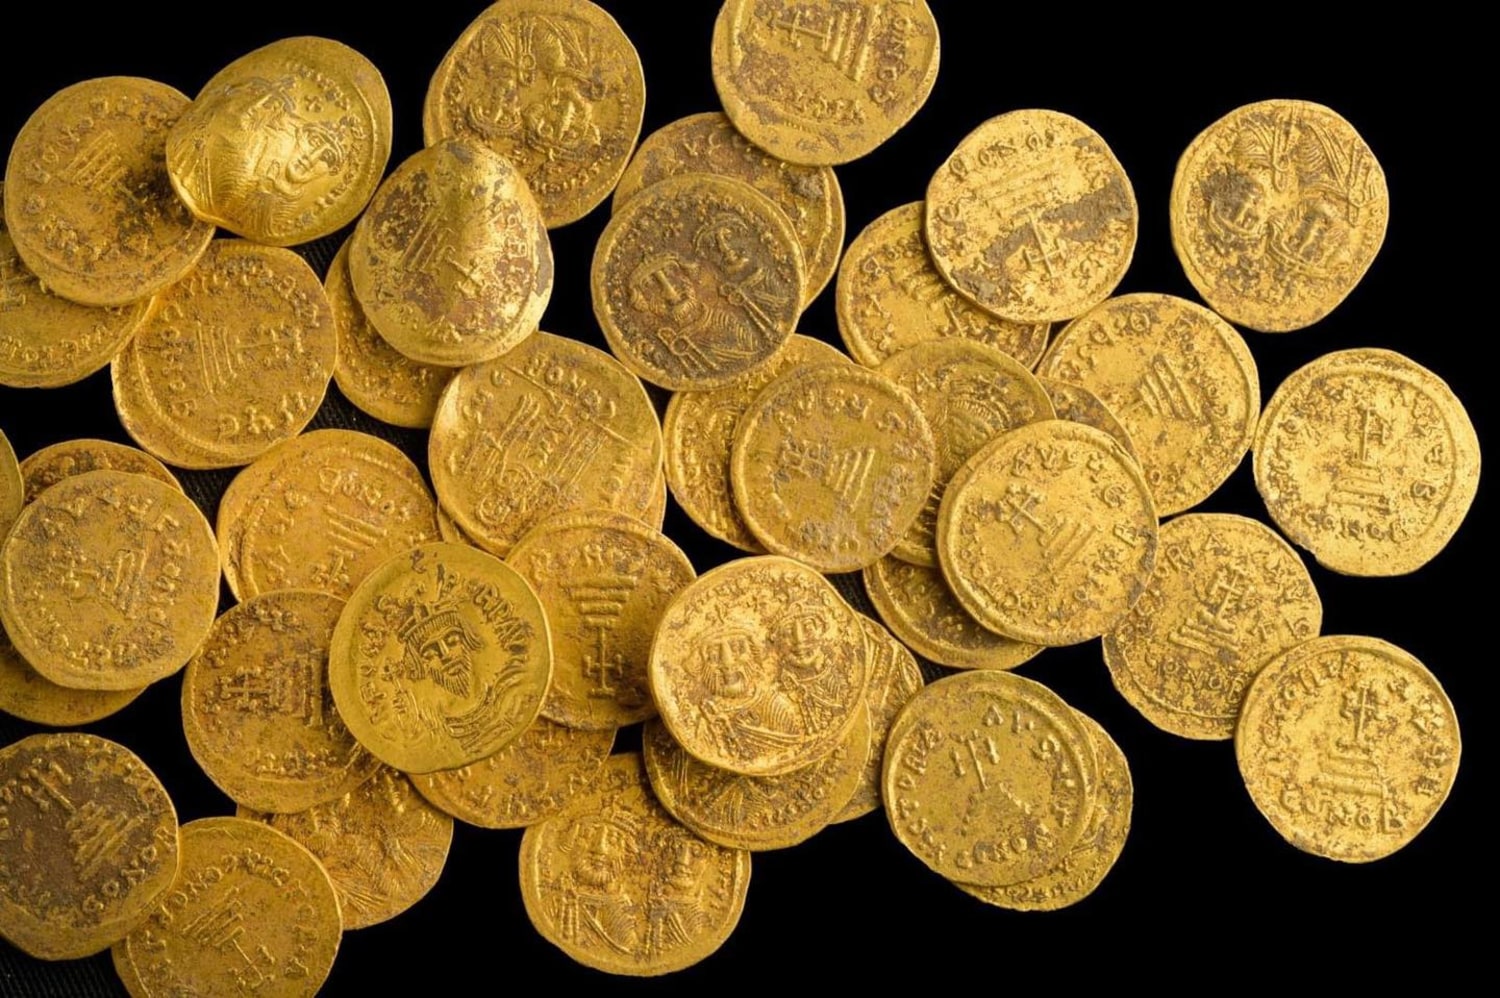 Trove of 239 Rare Gold Coins Discovered in Walls of French Mansion, Smart  News